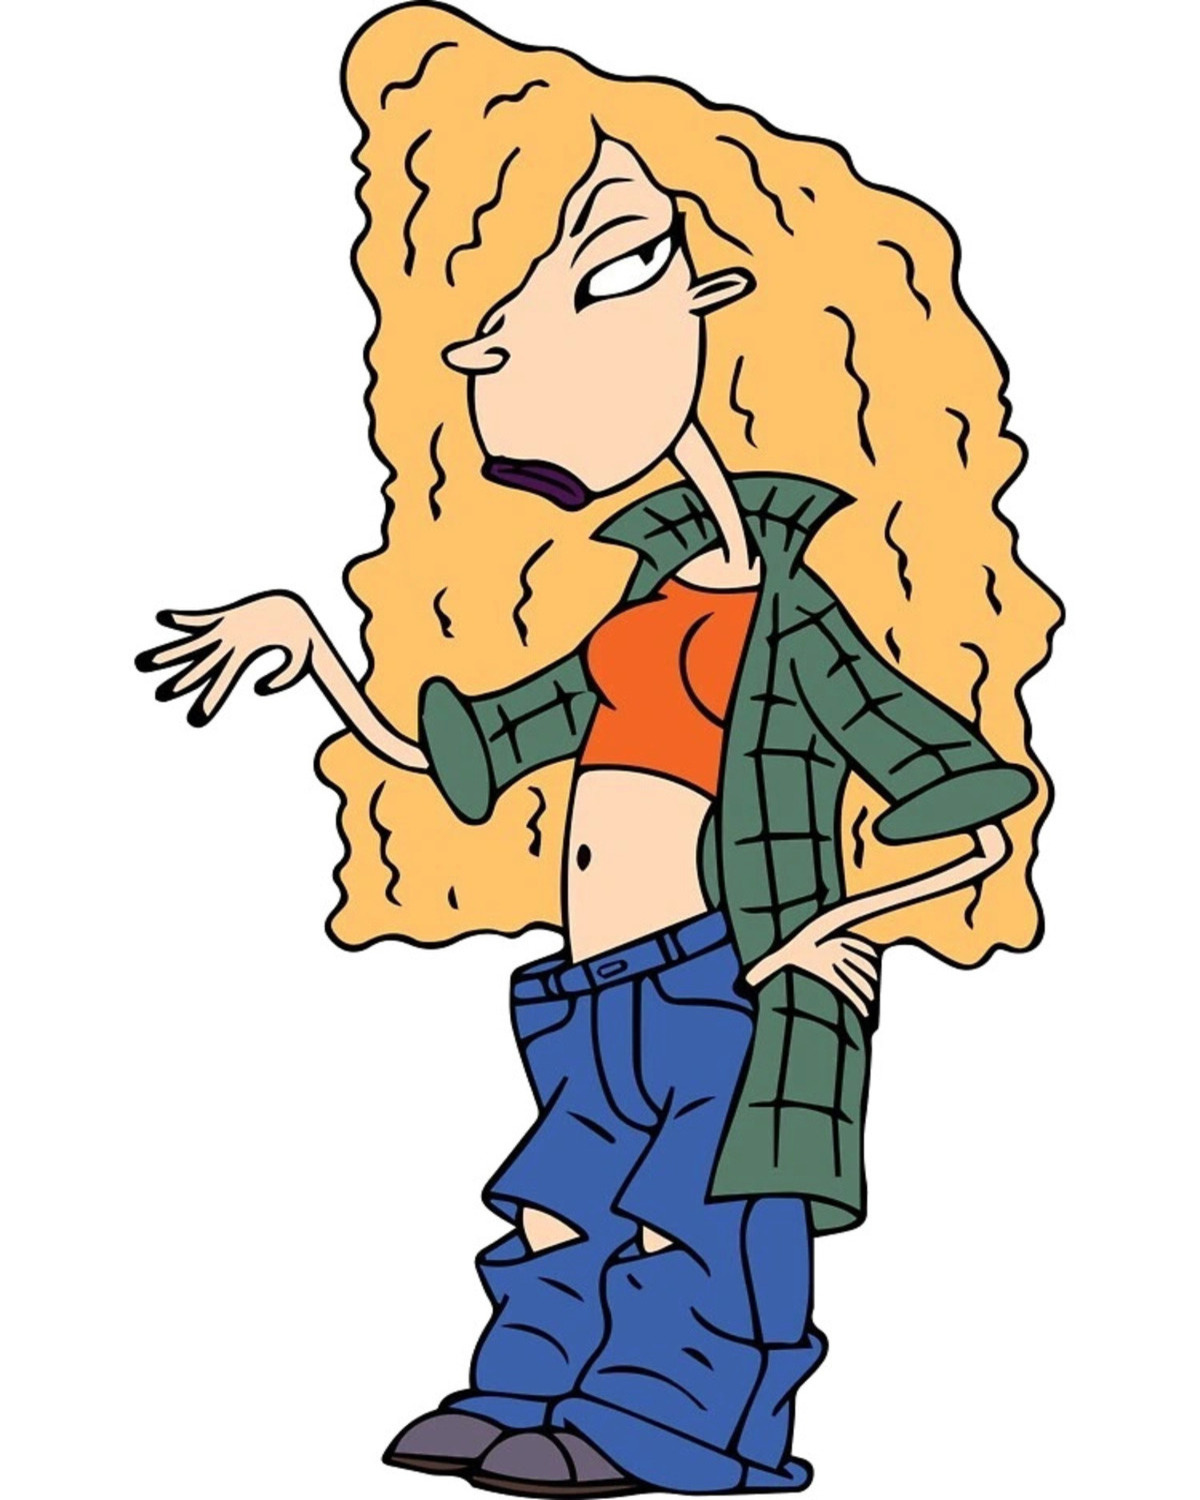 25-facts-about-debbie-thornberry-the-wild-thornberrys